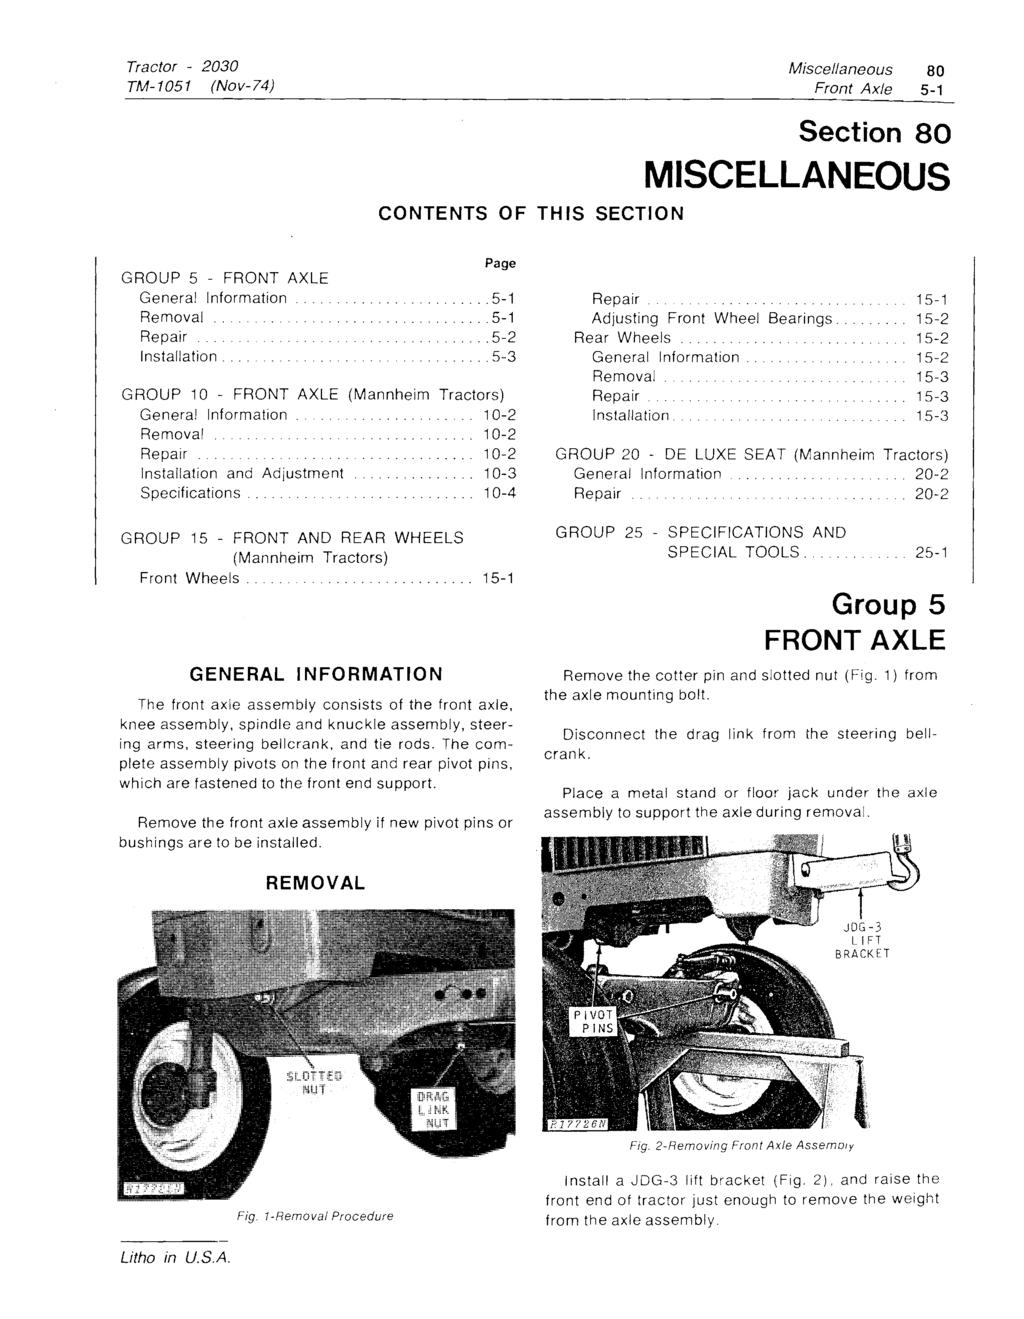 Miscellaneous 80 Front Axle 5-1 CONTENTS OF THIS SECTION Section 80 MISCELLANEOUS GROUP 5 - FRONT AXLE... 5-1............................. 5-1 Repair........... 5-2.......... 5~ GROUP 10 - FRONT AXLE.